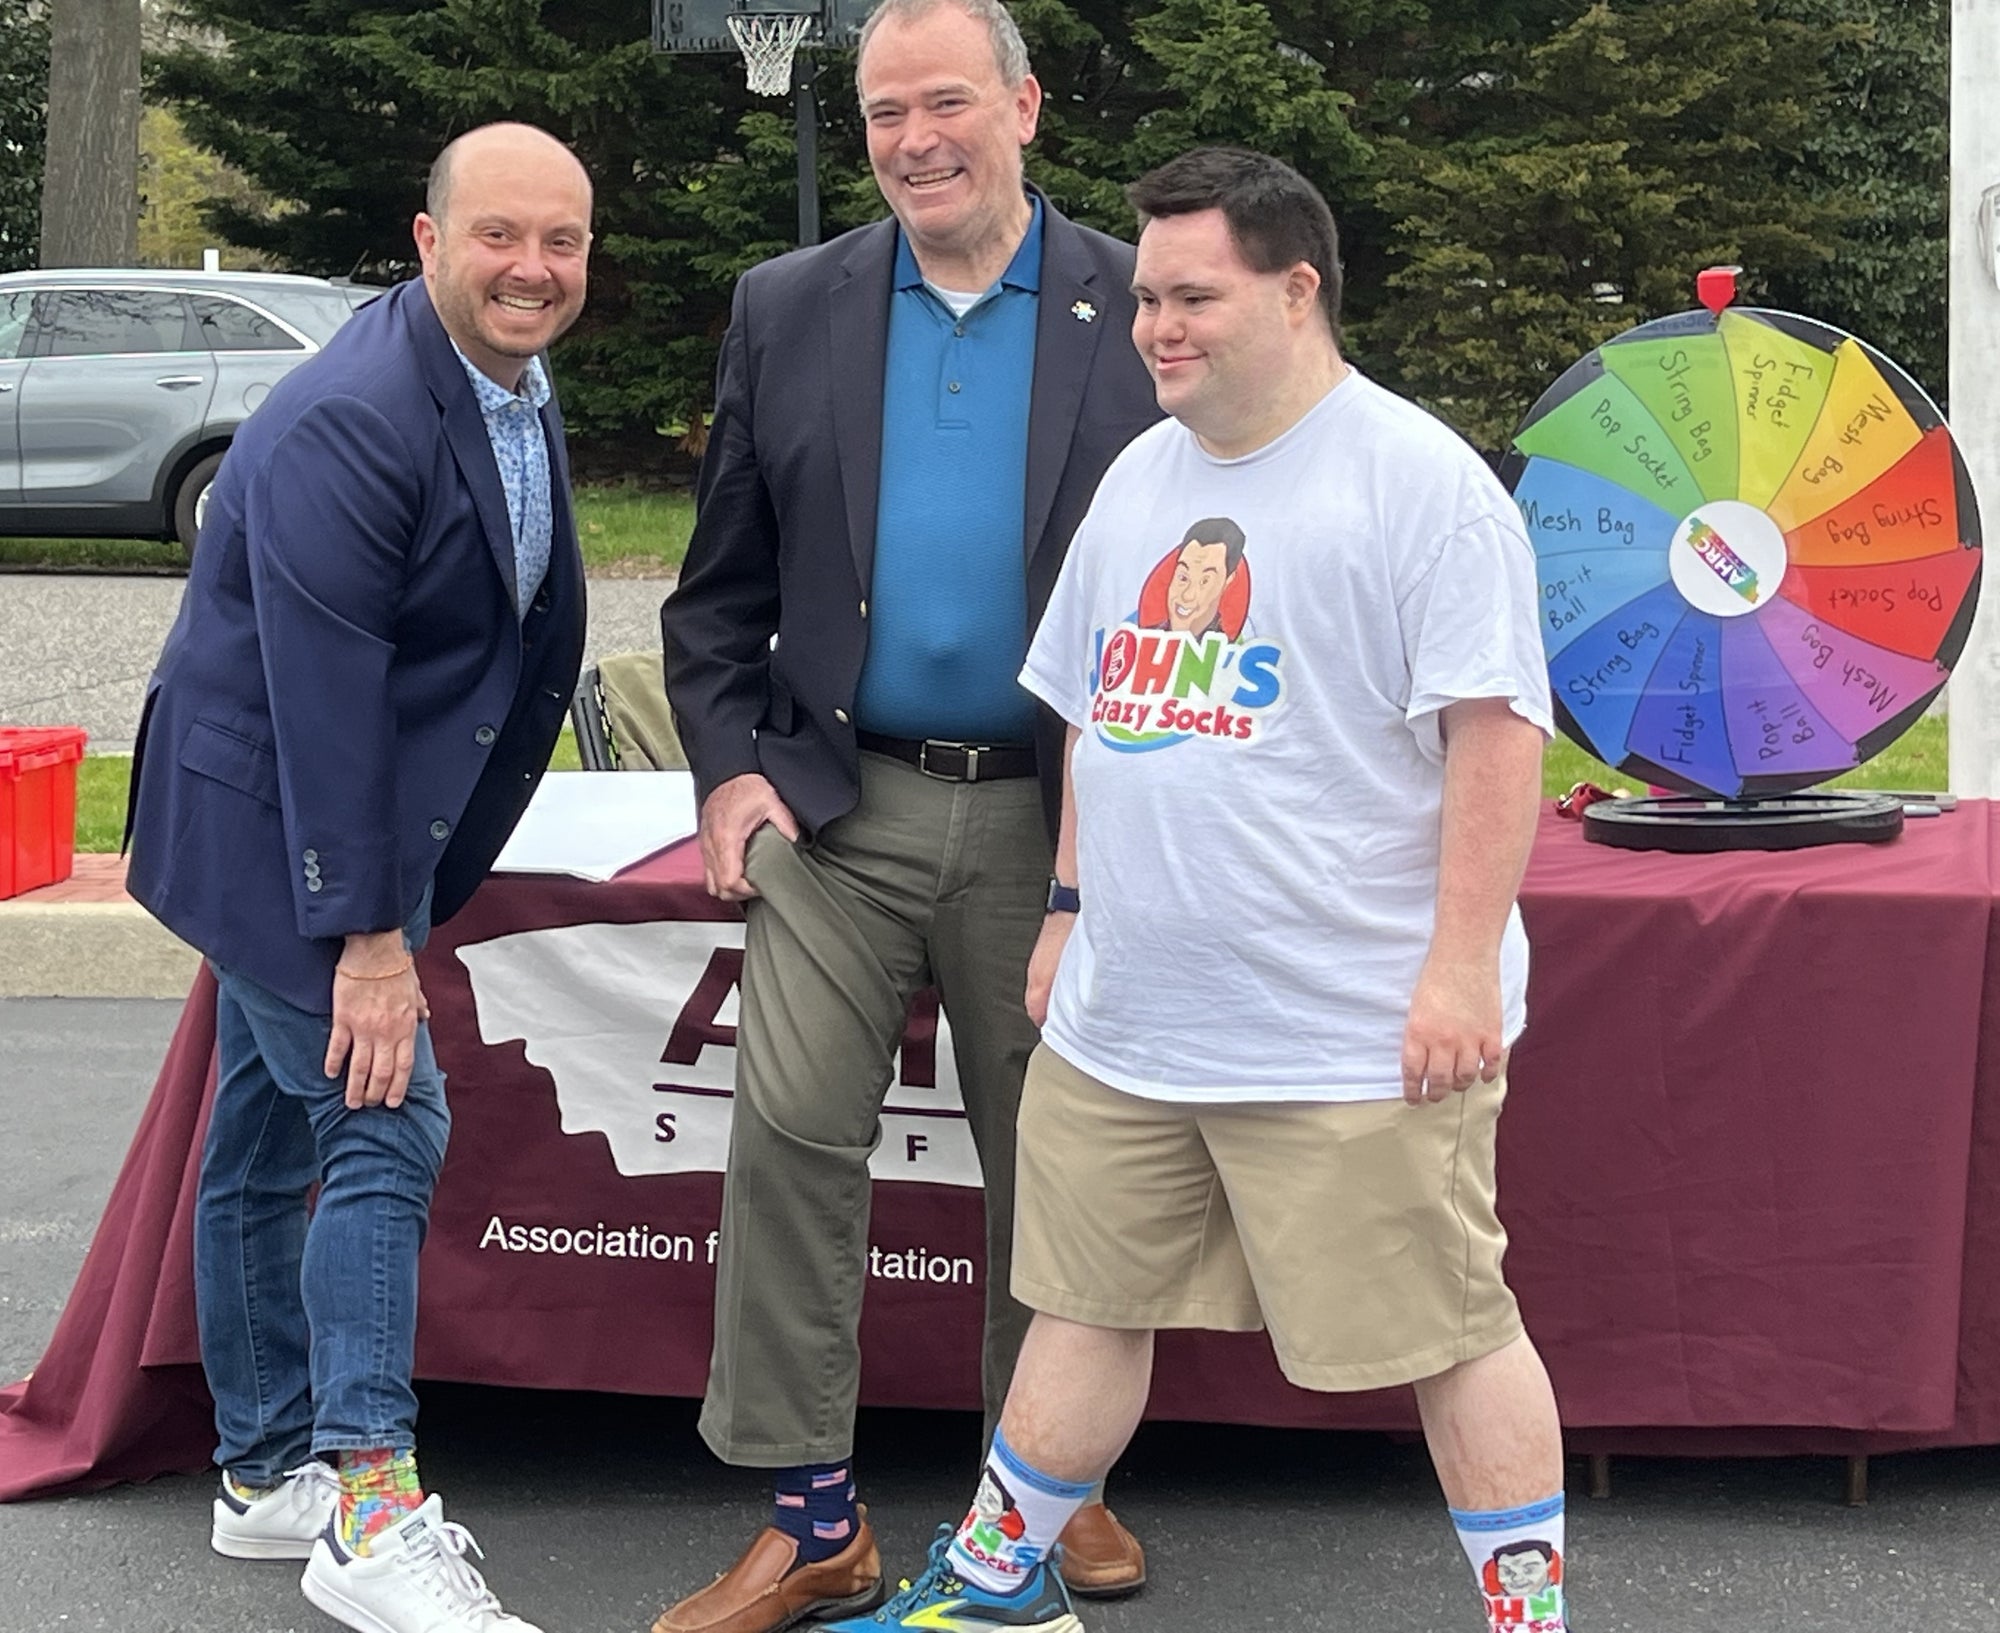 John’s Crazy Socks Joins the Third Annual Long Island Autism Acceptance